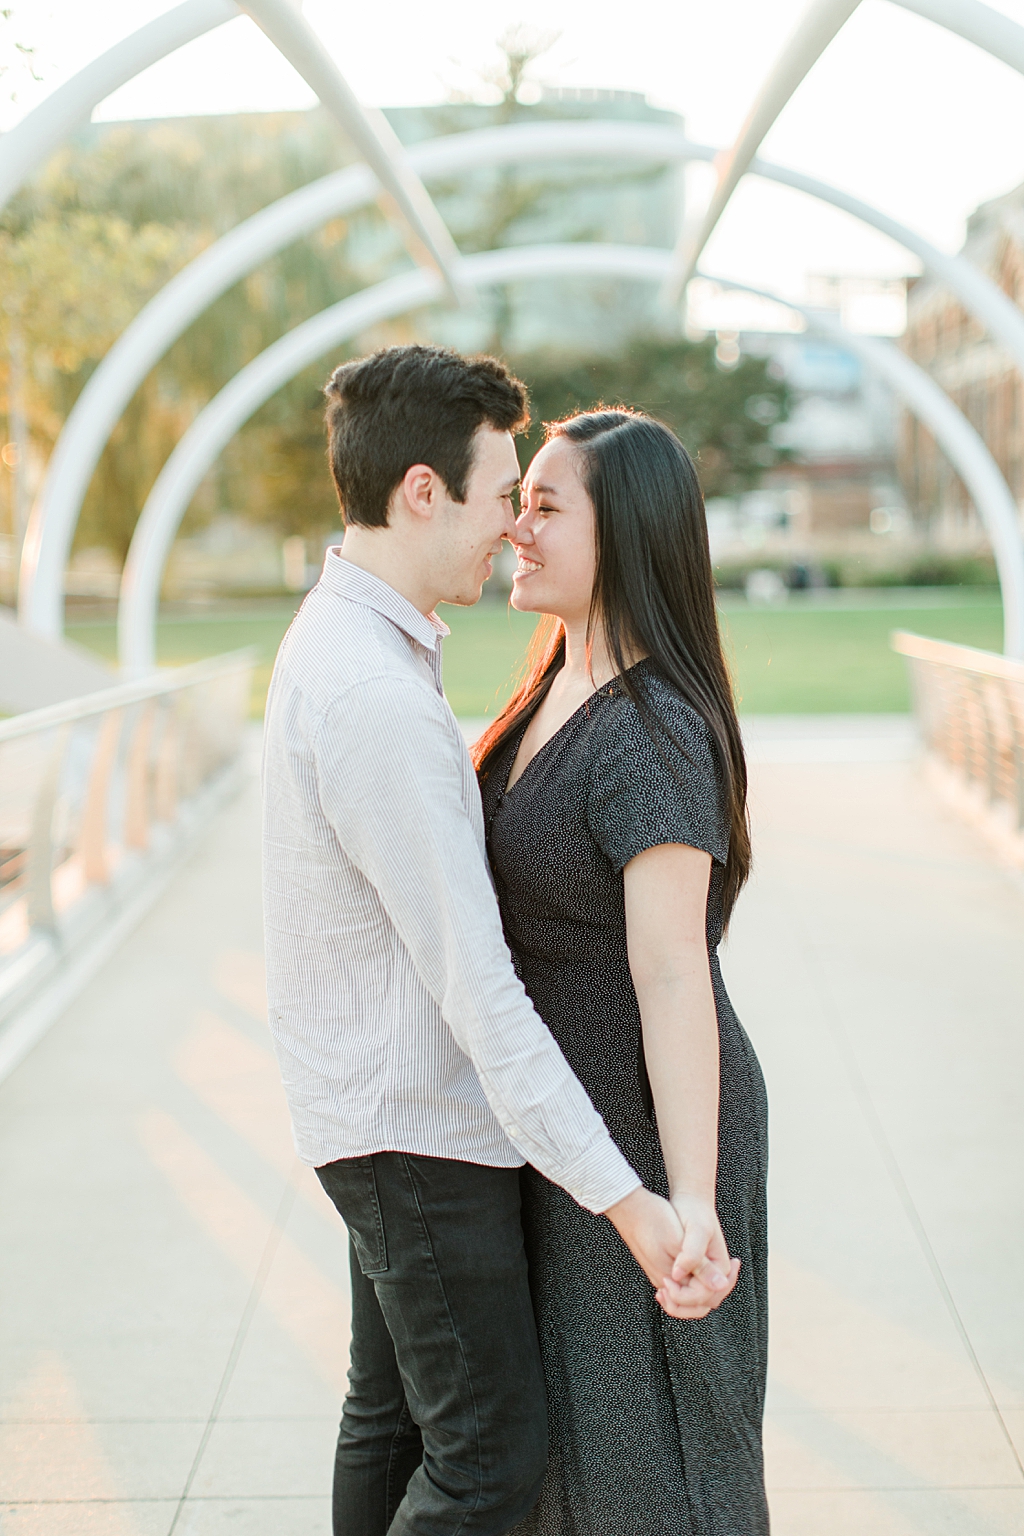 Becky_Collin_Navy_Yards_Park_The_Wharf_Washington_DC_Fall_Engagement_Session_AngelikaJohnsPhotography-8018.jpg